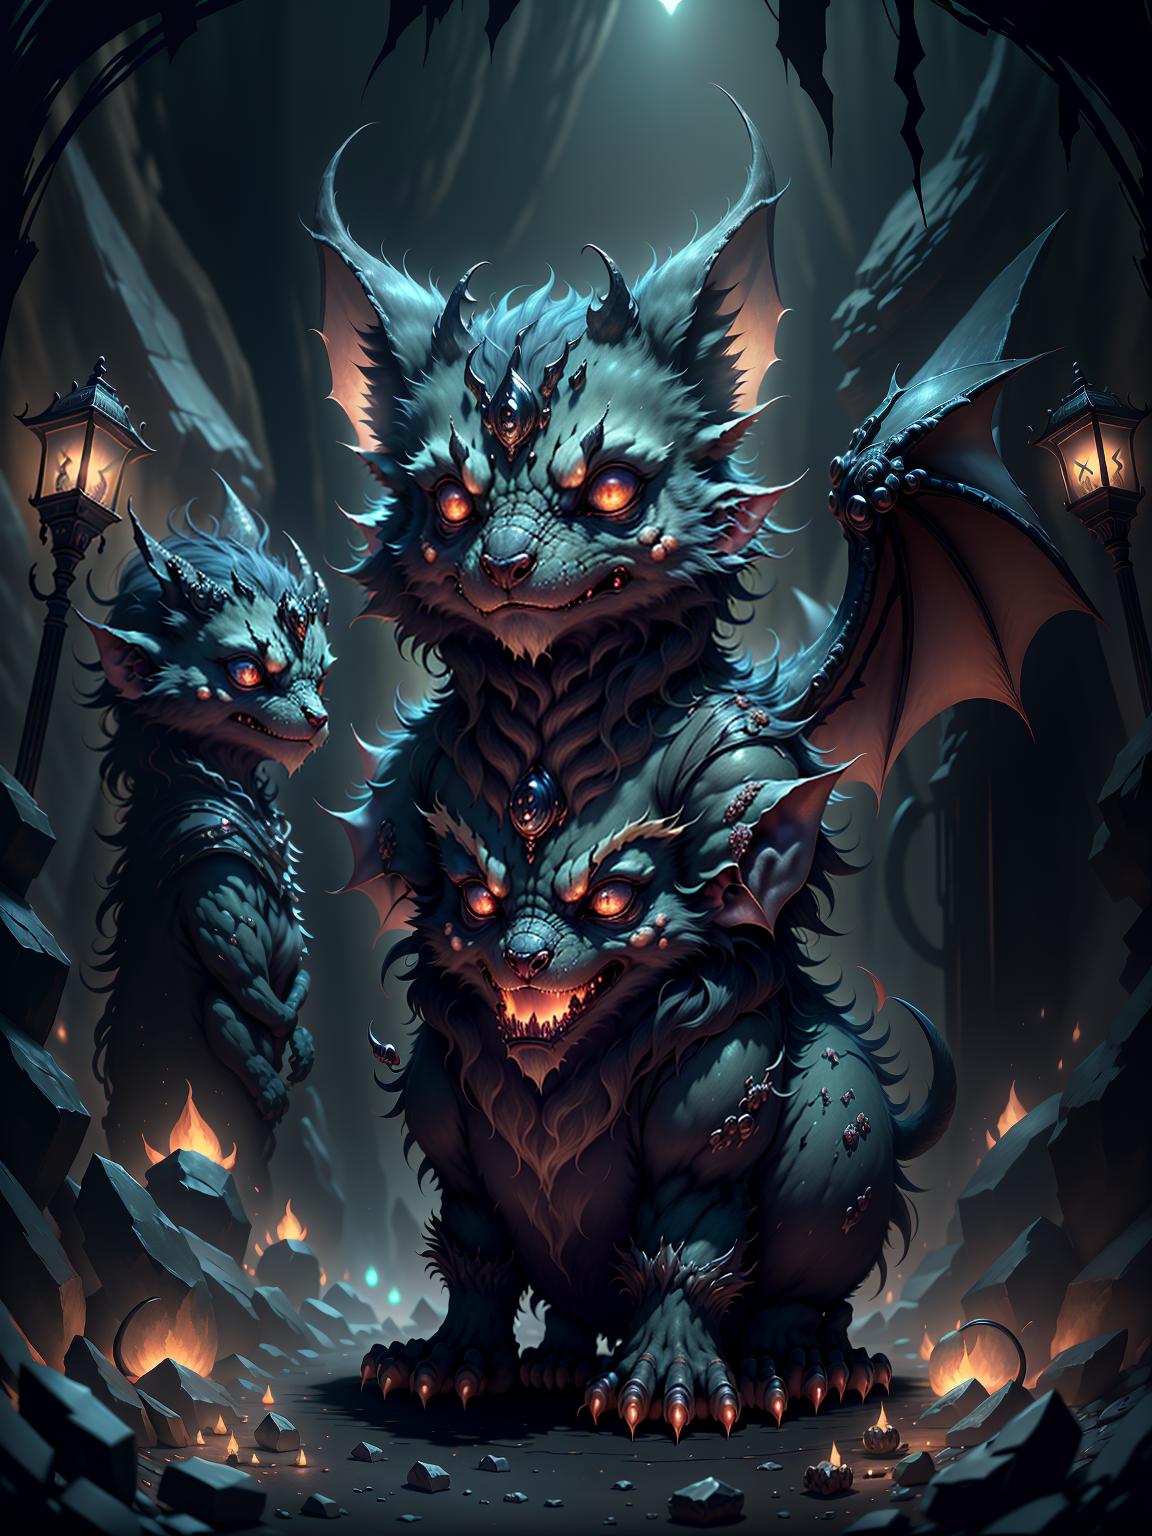  master piece, best quality, ultra detailed, highres, 4k.8k, Cerberus, Guarding the Gates of the Underworld, Alert, Vigilant, Fierce, BREAK Guardian of the Underworld, Entrance to the Underworld, Gates, Chains, Torches, Hades' throne, BREAK Eerie, Foreboding, Mysterious, Glowing eyes, Flickering torchlight, Shadows playing, creature00d,Cu73Cre4ture